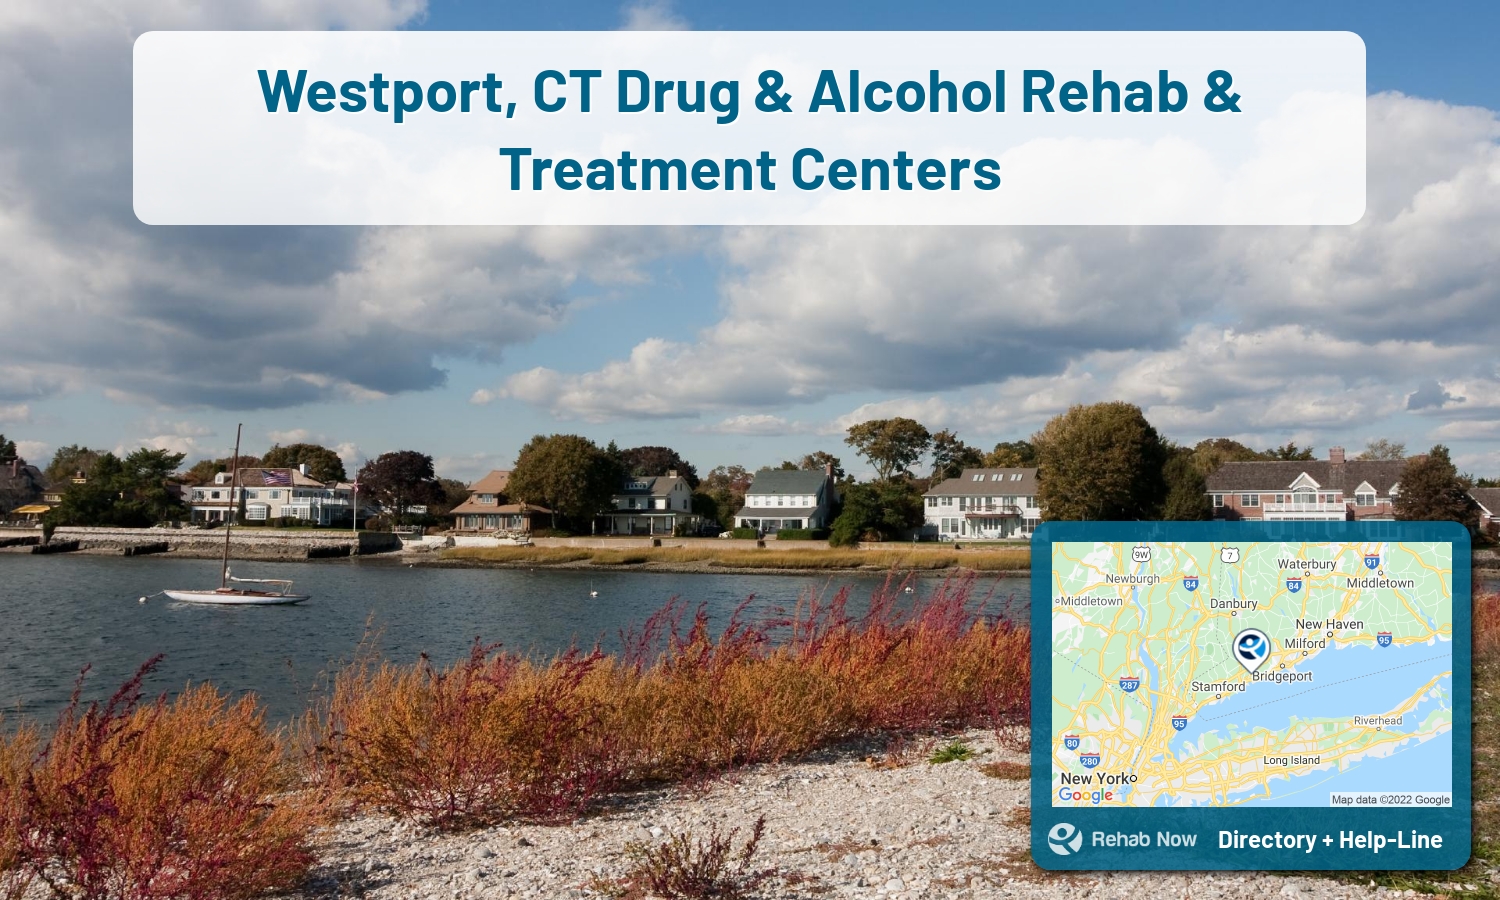 View options, availability, treatment methods, and more, for drug rehab and alcohol treatment in Westport, Connecticut